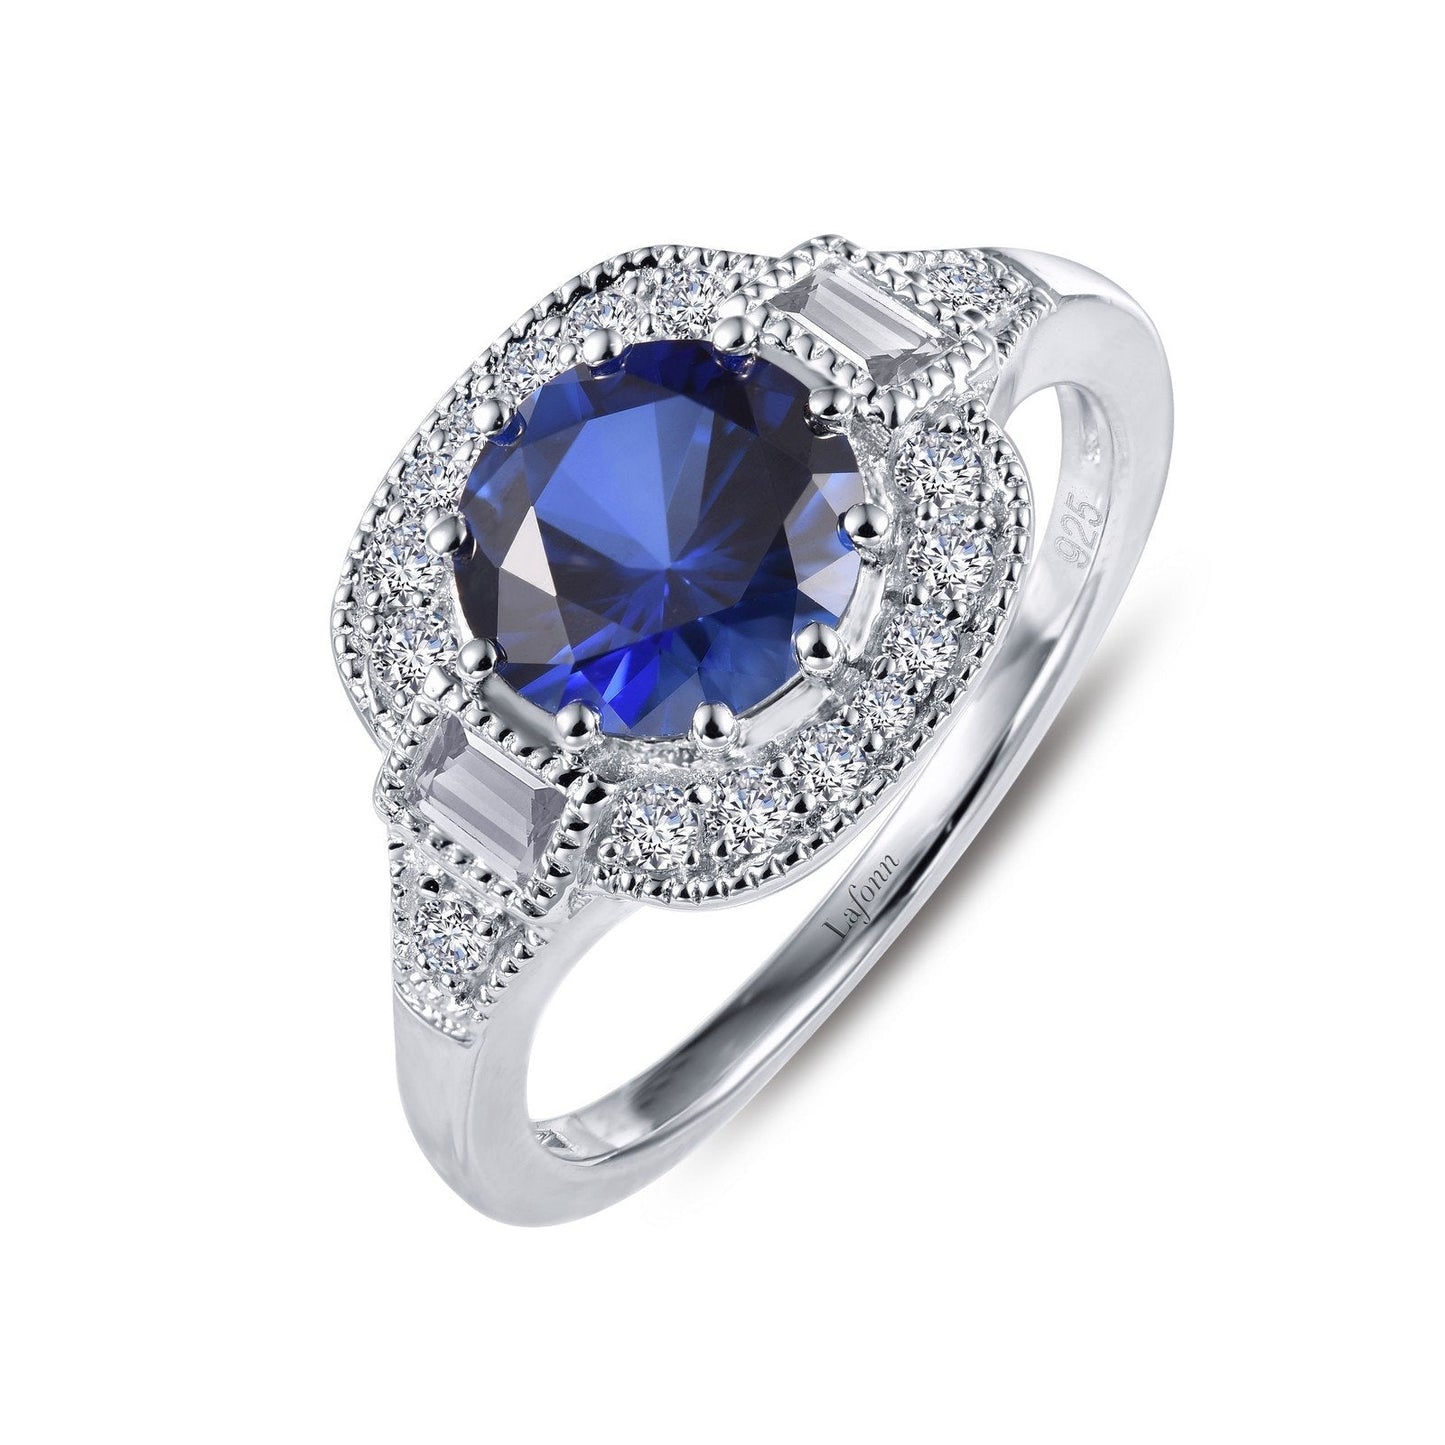 Load image into Gallery viewer, Lafonn Vintage Inspired Engagement Ring Sapphire RINGS Size 8 Platinum 1.7 CTS Width approx. 11mm
